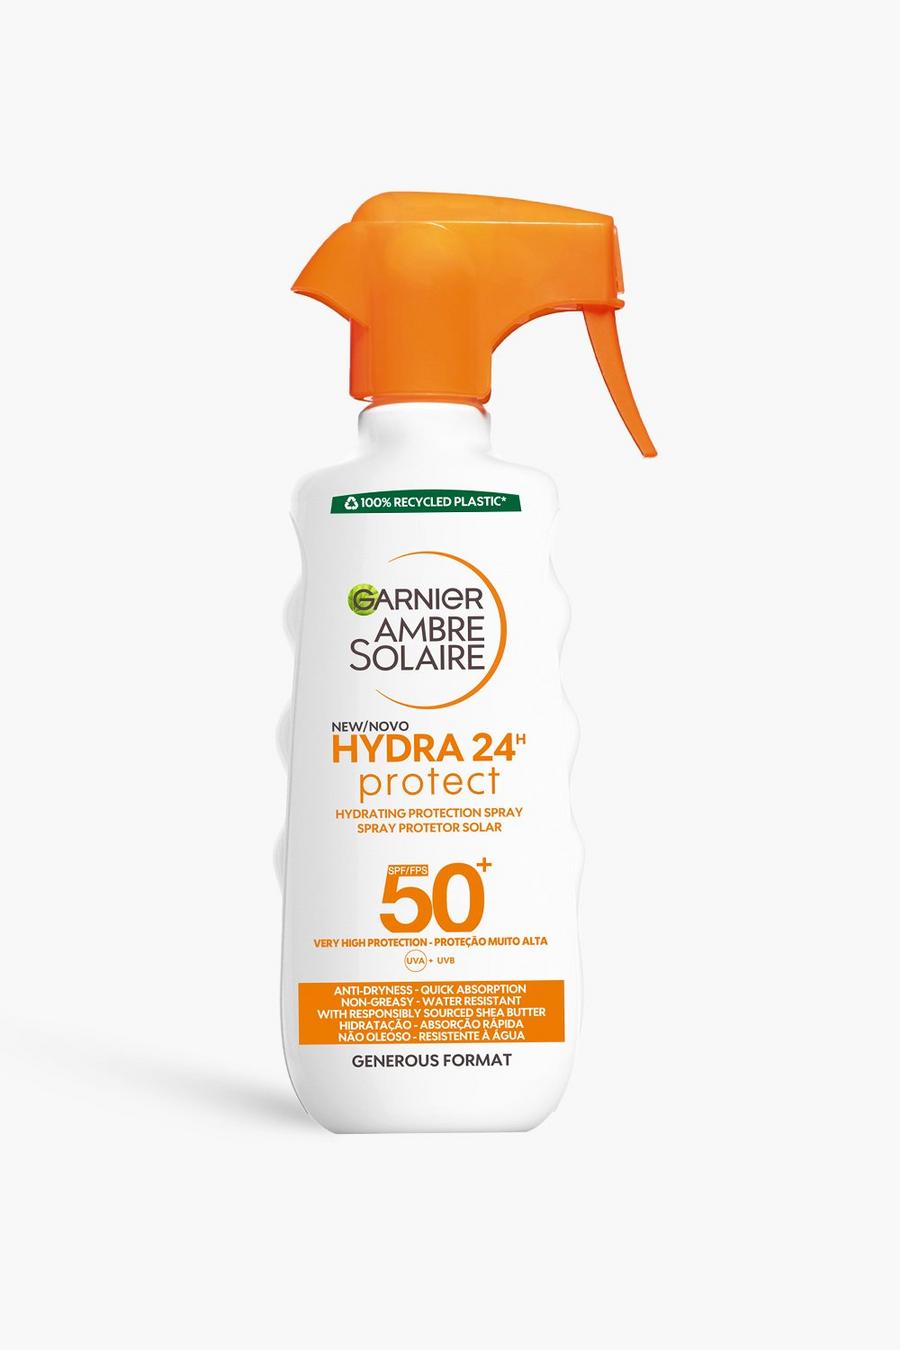 White blanc Garnier Ambre Solaire Hydra 24 Hour Protect Hydrating Protection Spray SPF50, UVA & UVB Protection, 300ml (SAVE 31%)